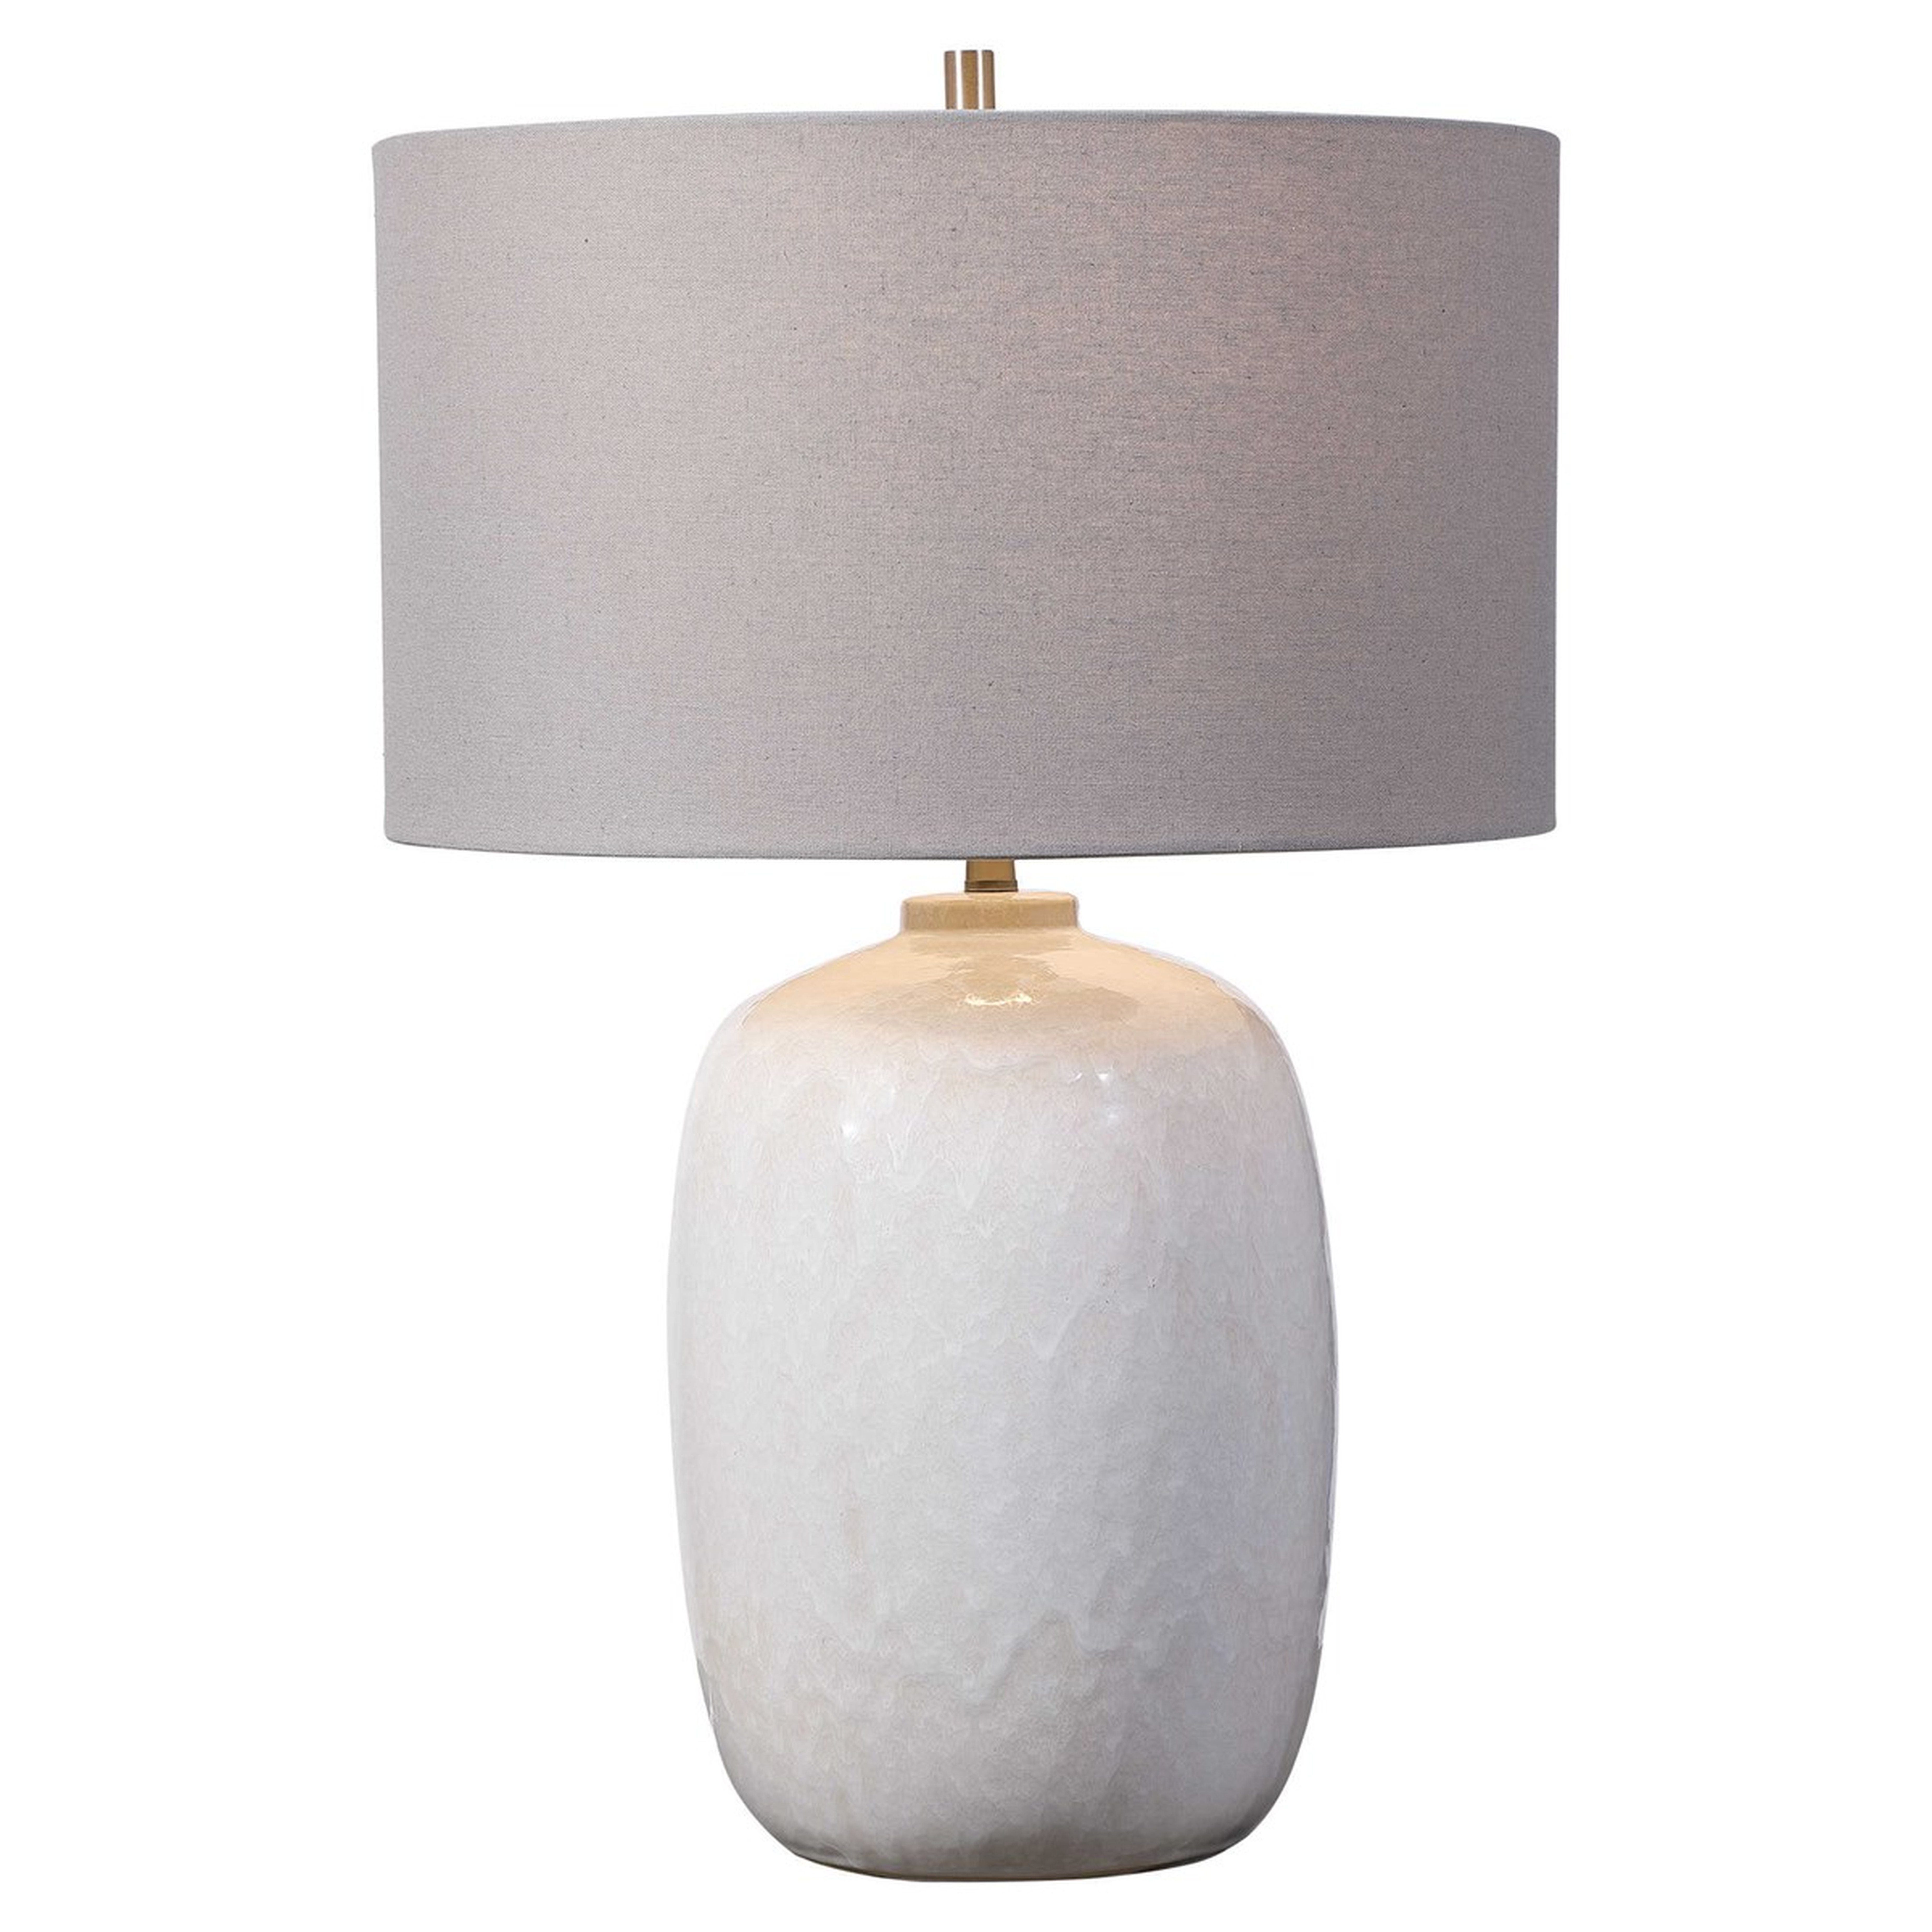 Winterscape Table Lamp, White Glaze - Hudsonhill Foundry